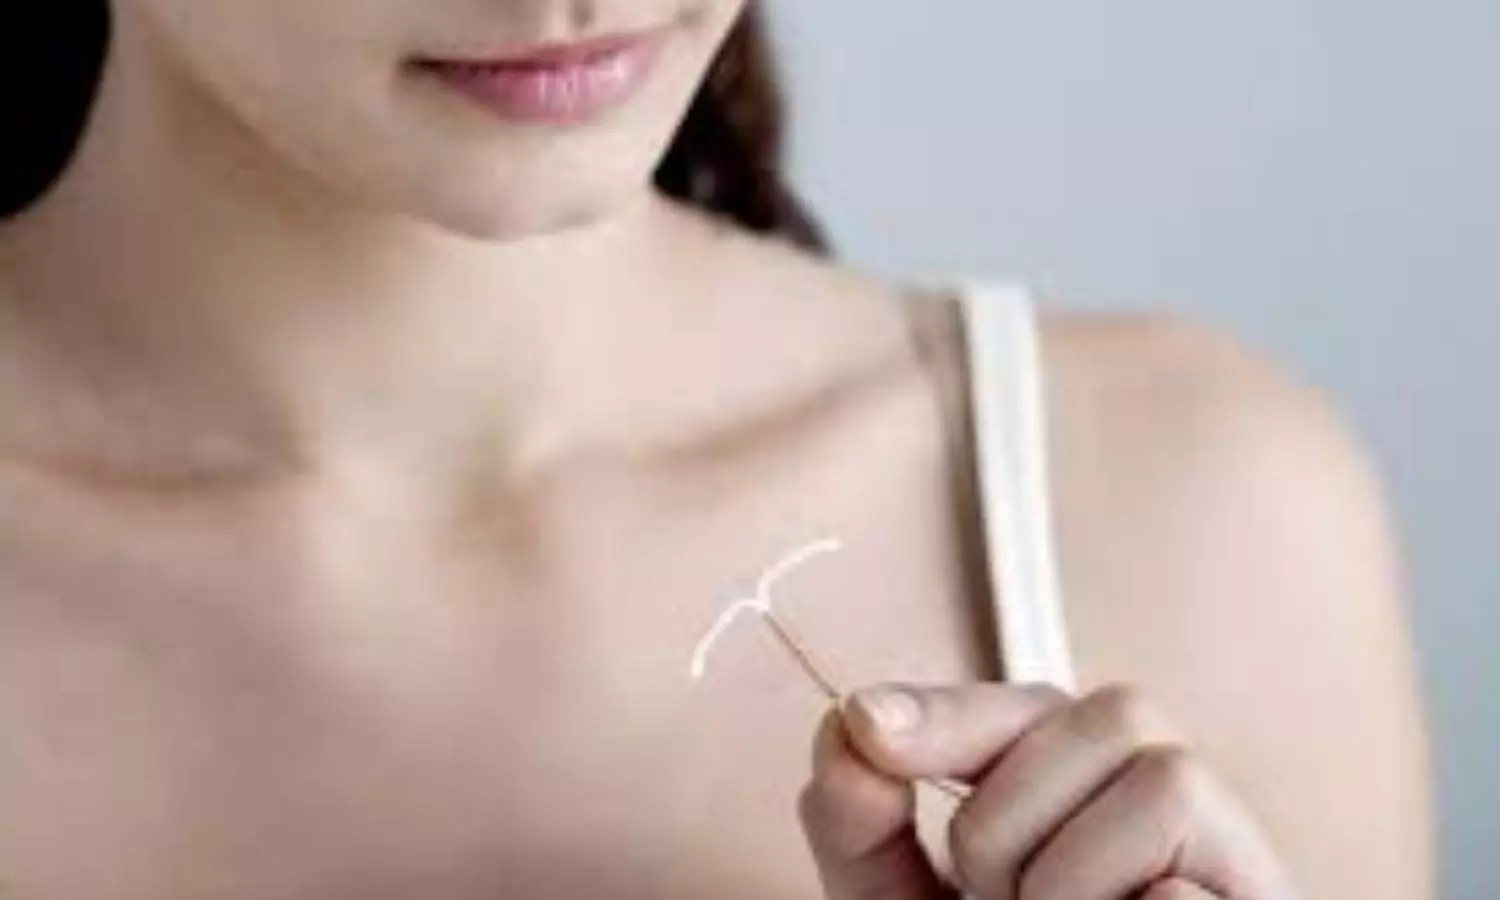 Women can be safely offered IUDs beyond 4 weeks postpartum with minimal risk of perforation: STUDY